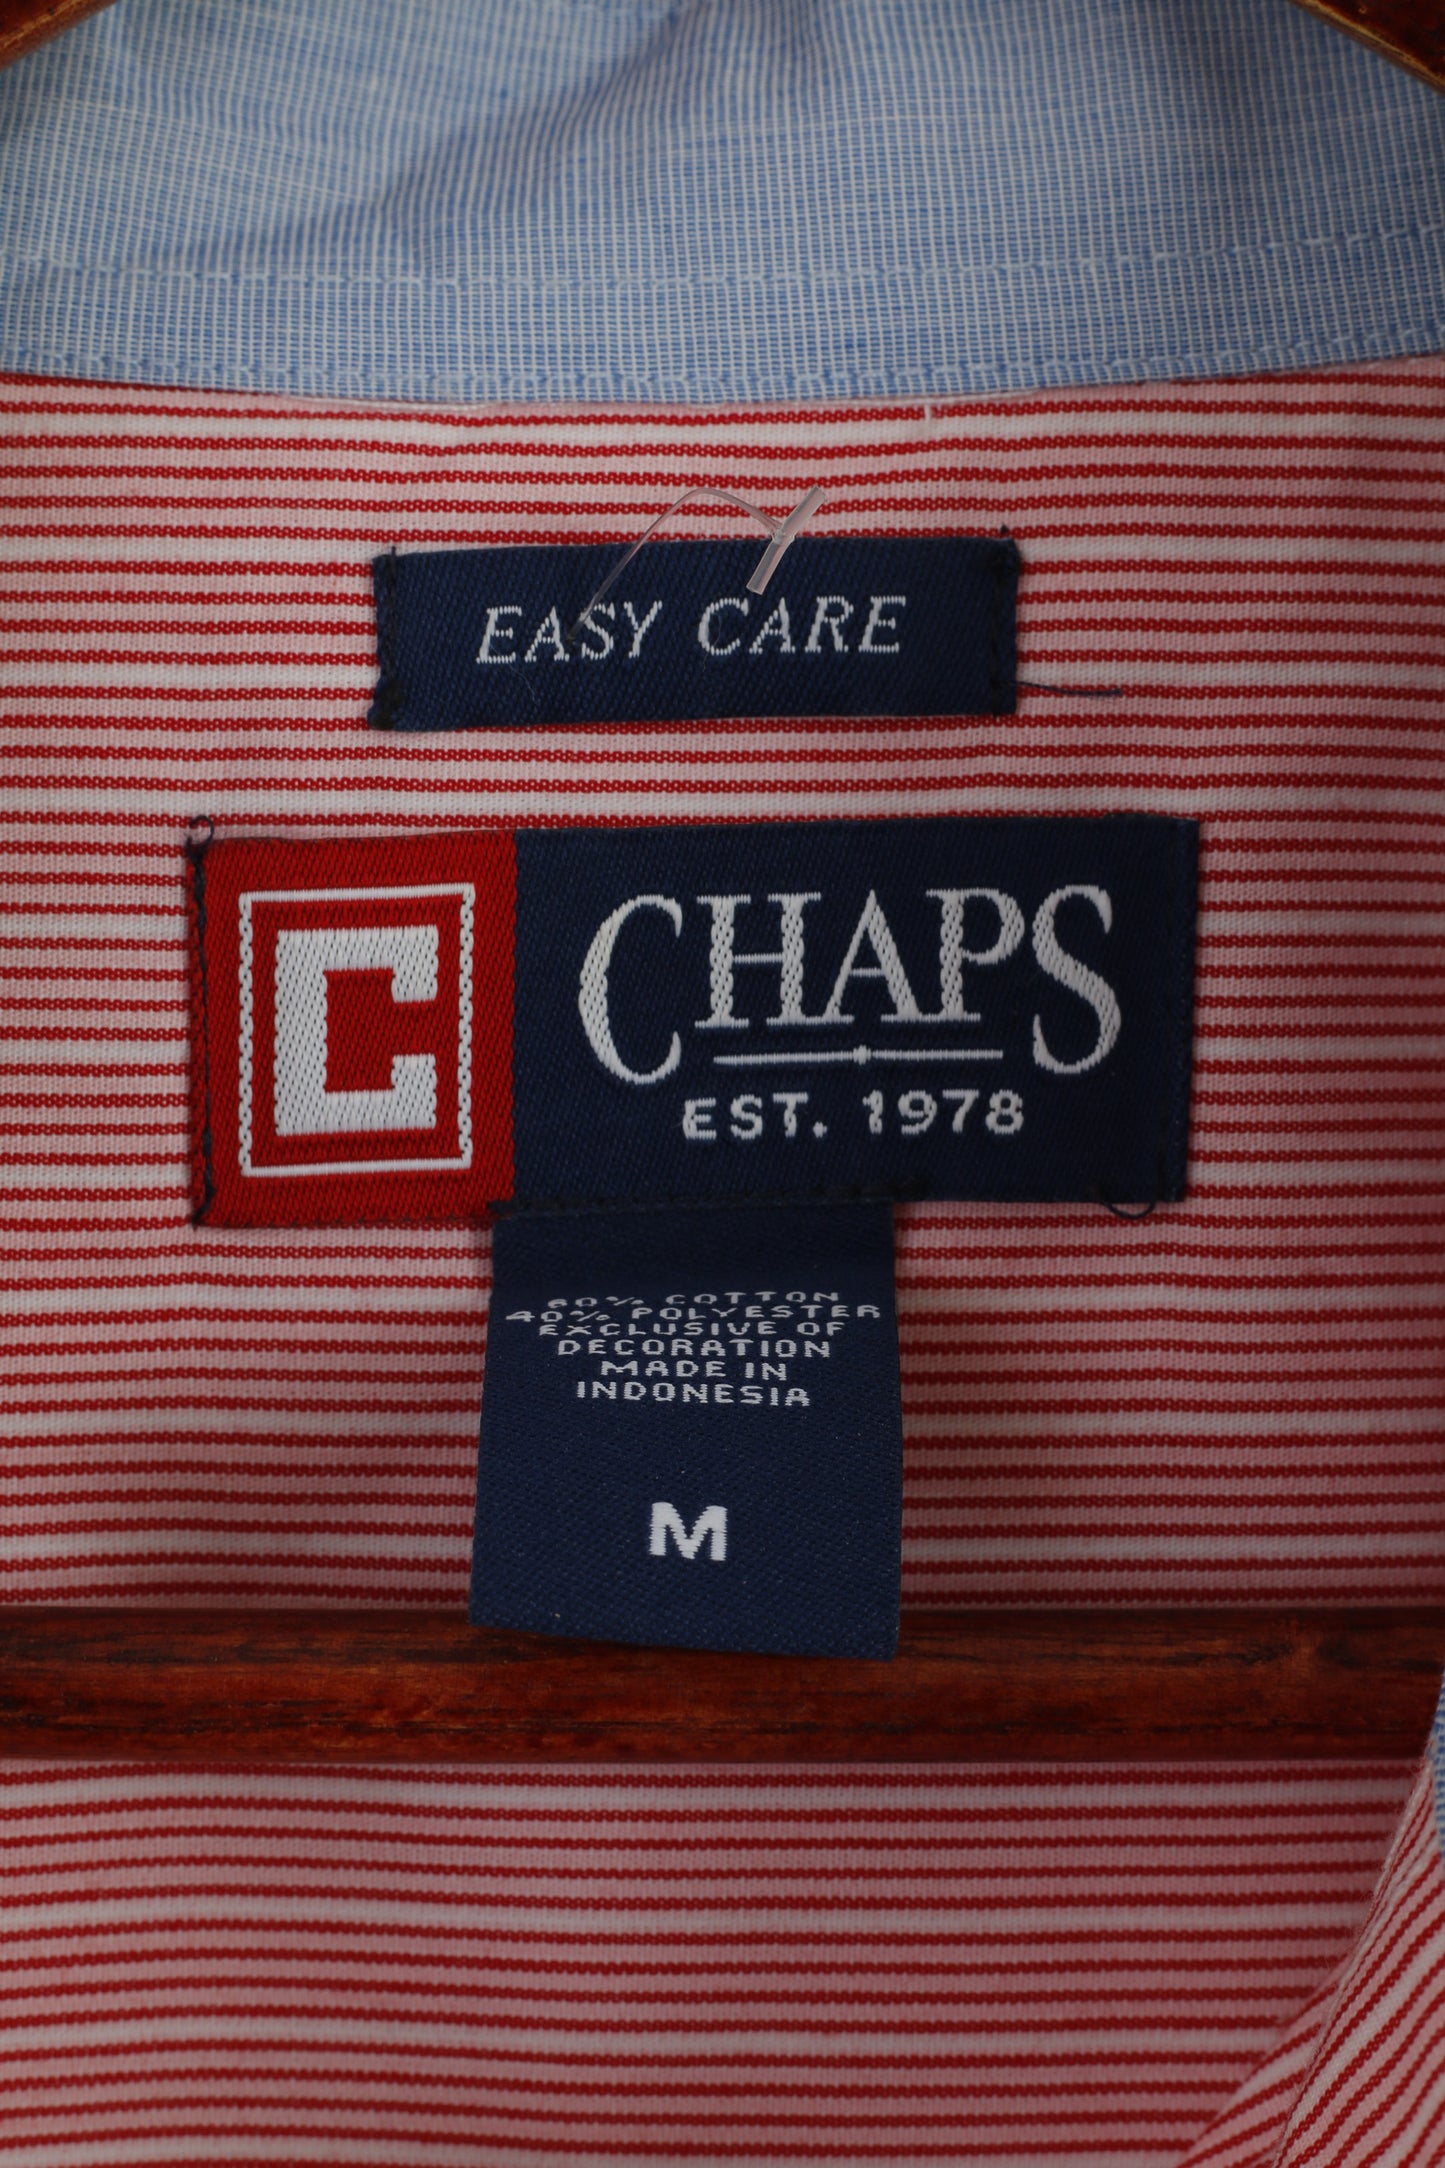 CHAPS Men M Casual Shirt Red Striped Cotton Long Sleeve Easy Care Pocket Classic Top